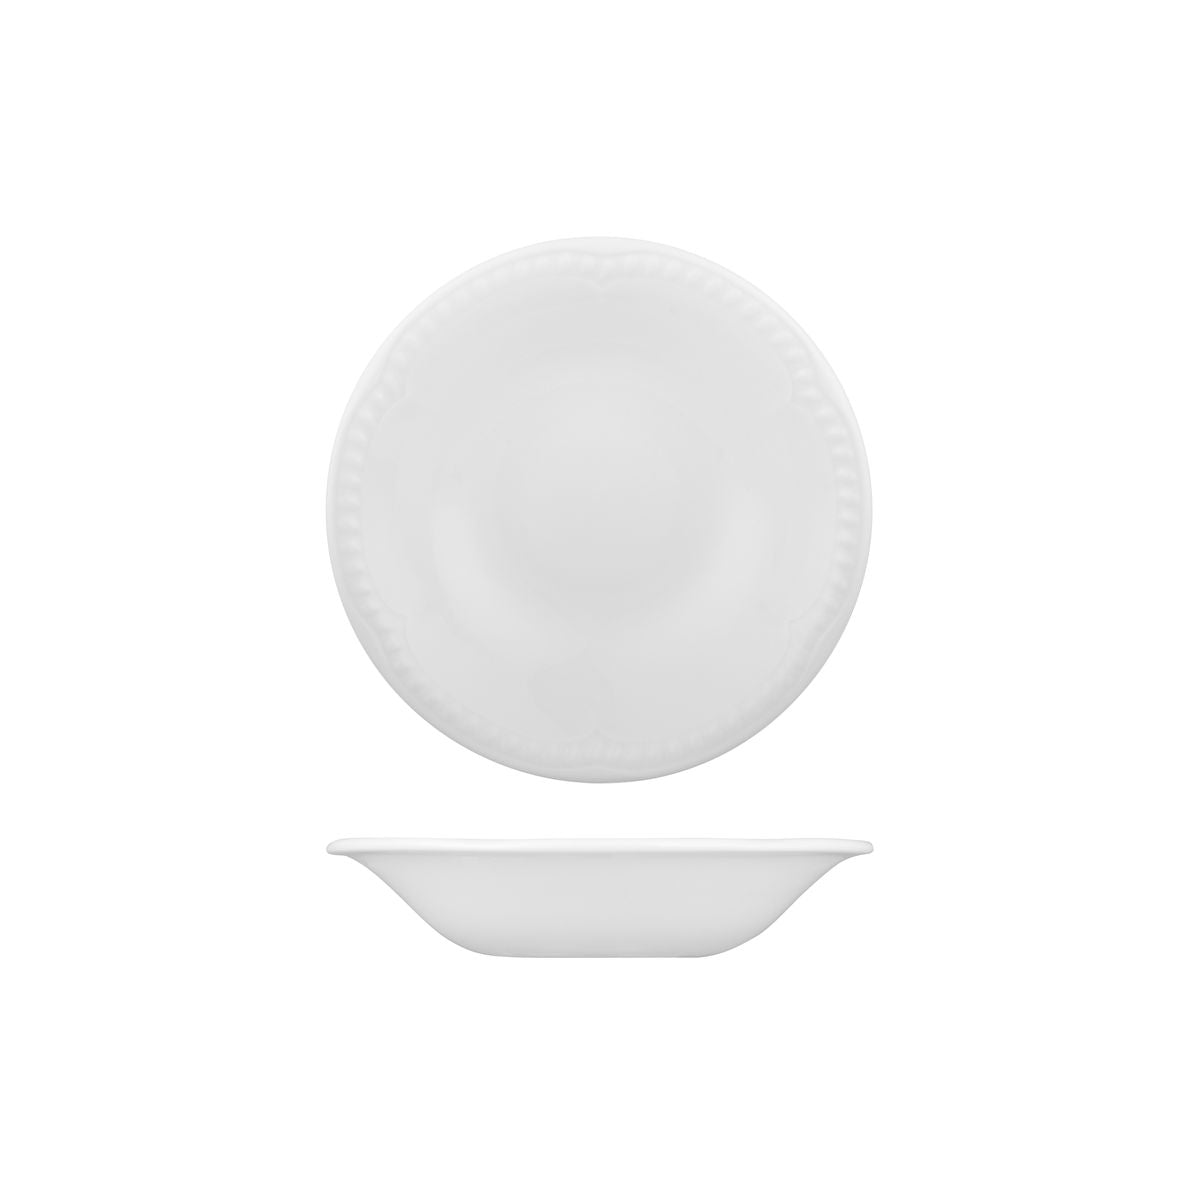 Round Bowl - 180mm, Buckingham from Churchill. made out of Porcelain and sold in boxes of 24. Hospitality quality at wholesale price with The Flying Fork! 